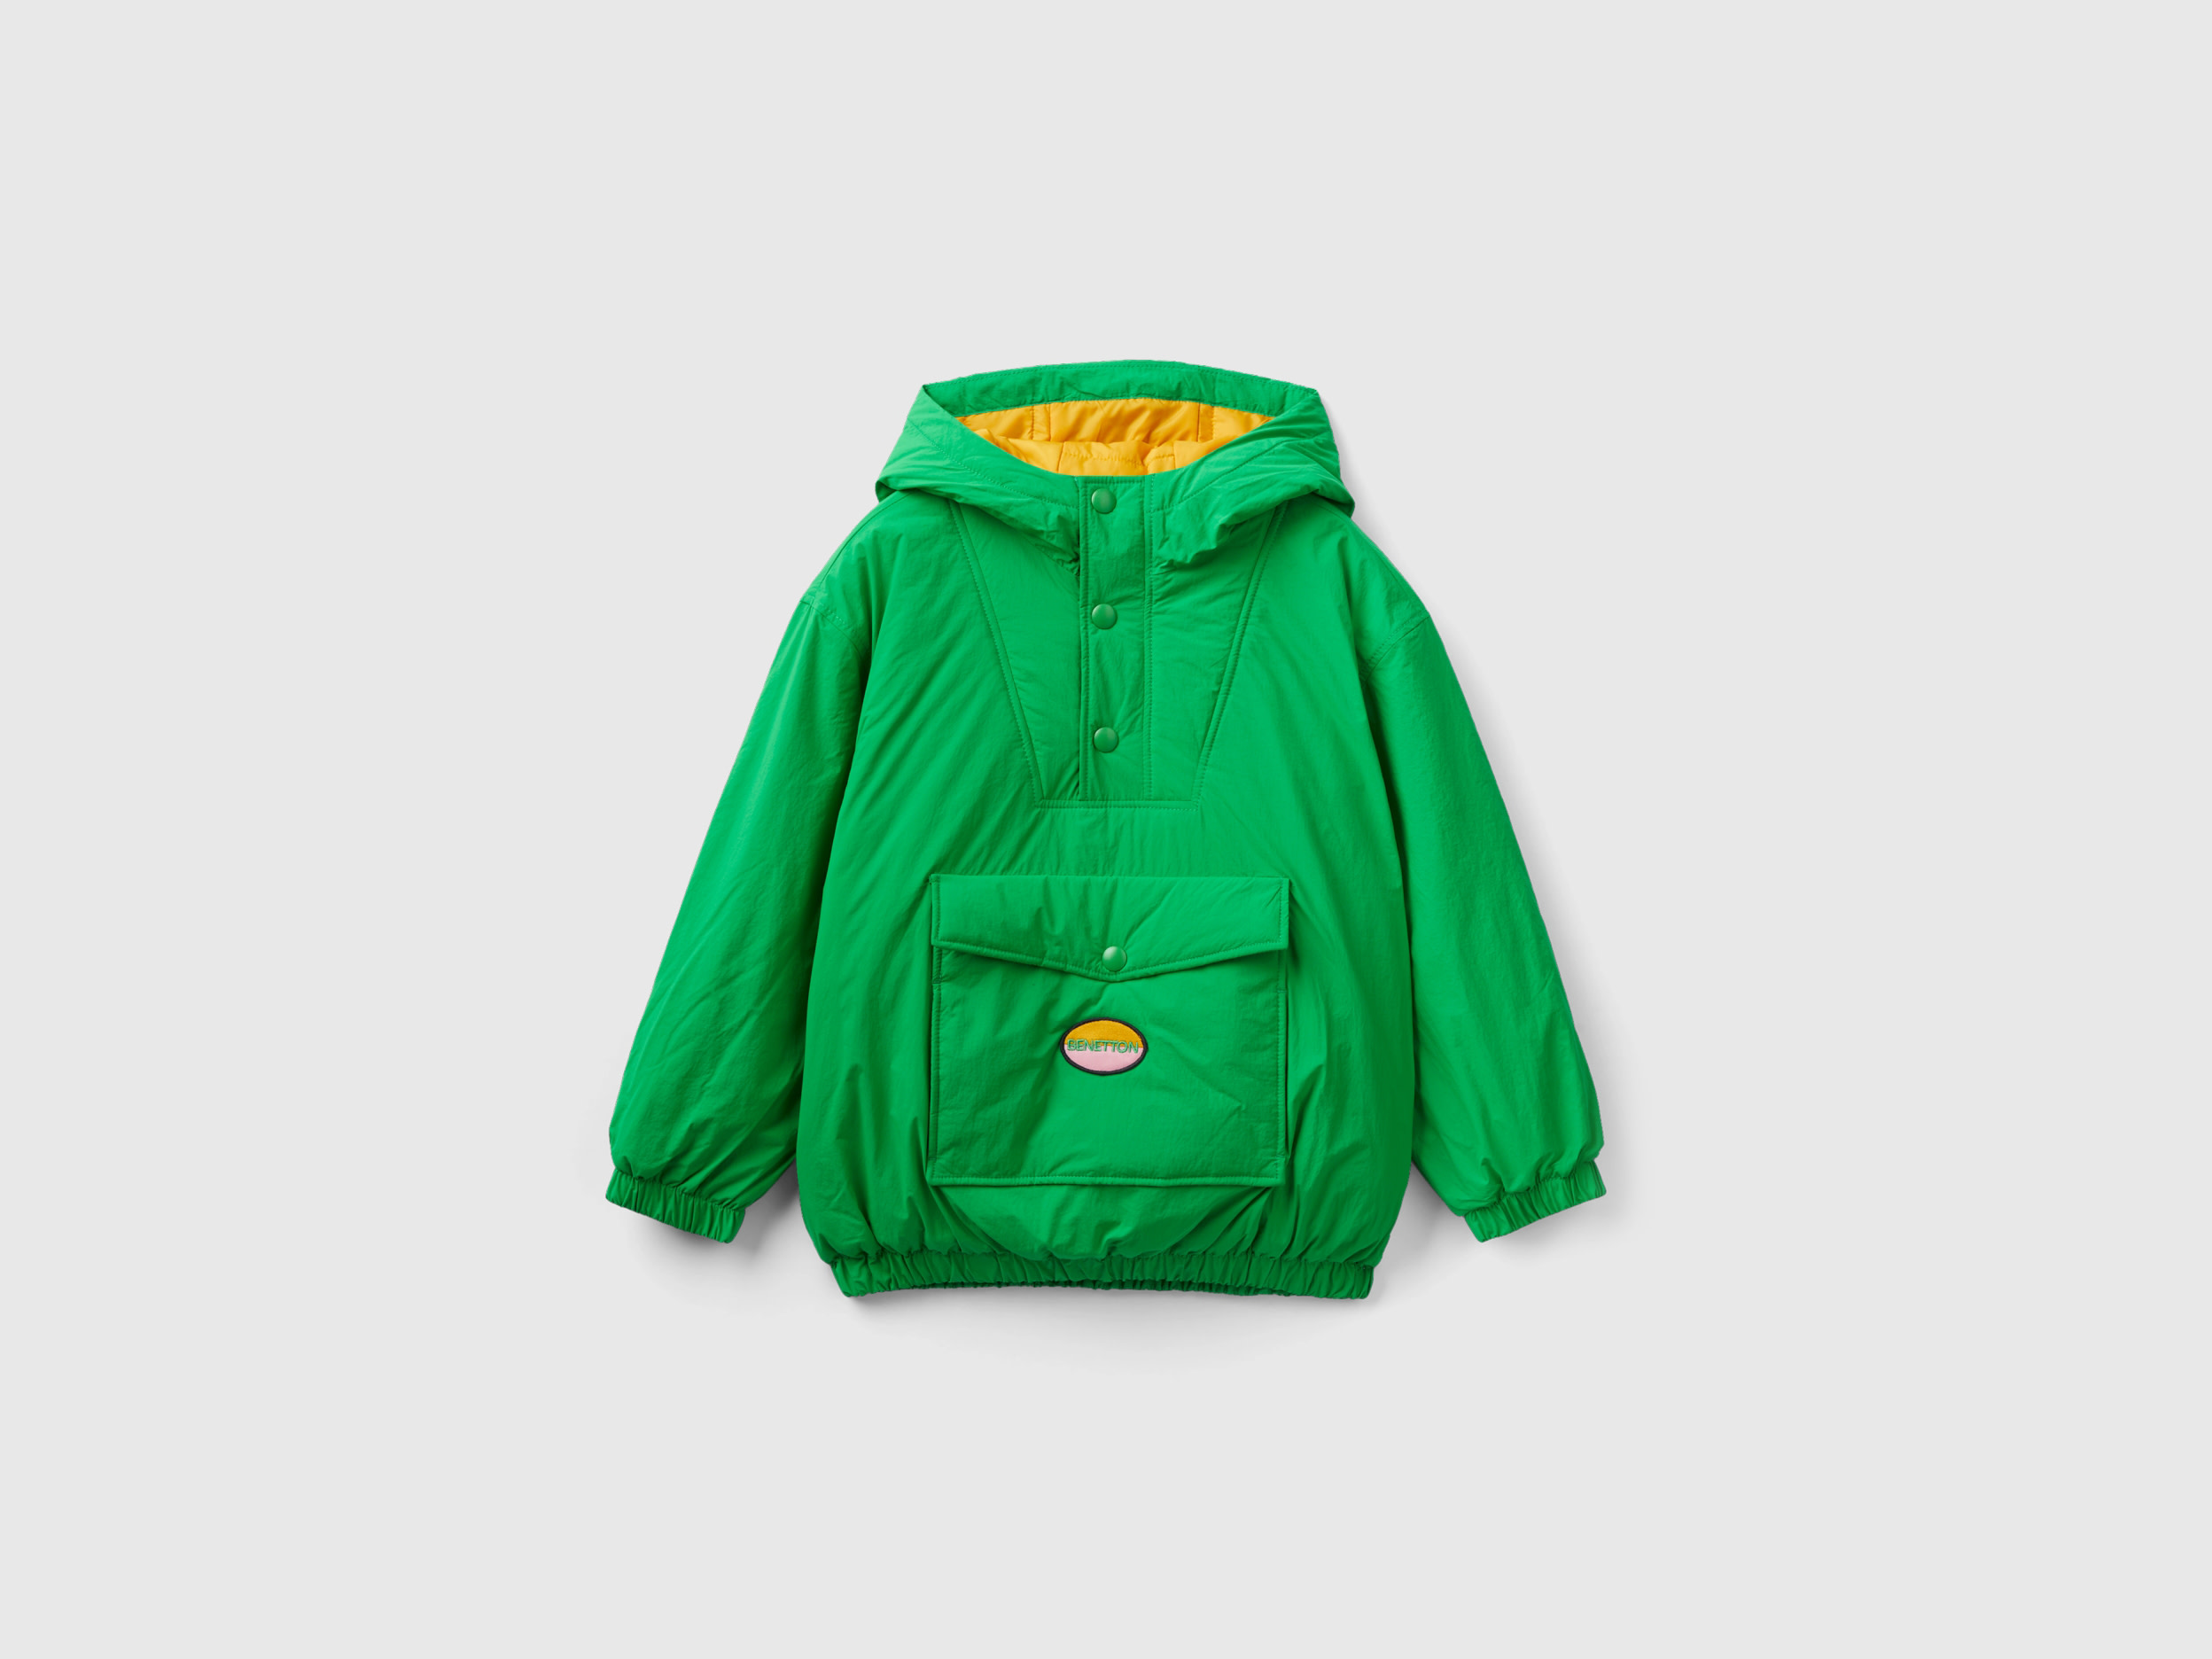 Benetton, Green Jacket With Pocket, size L, Green, Kids